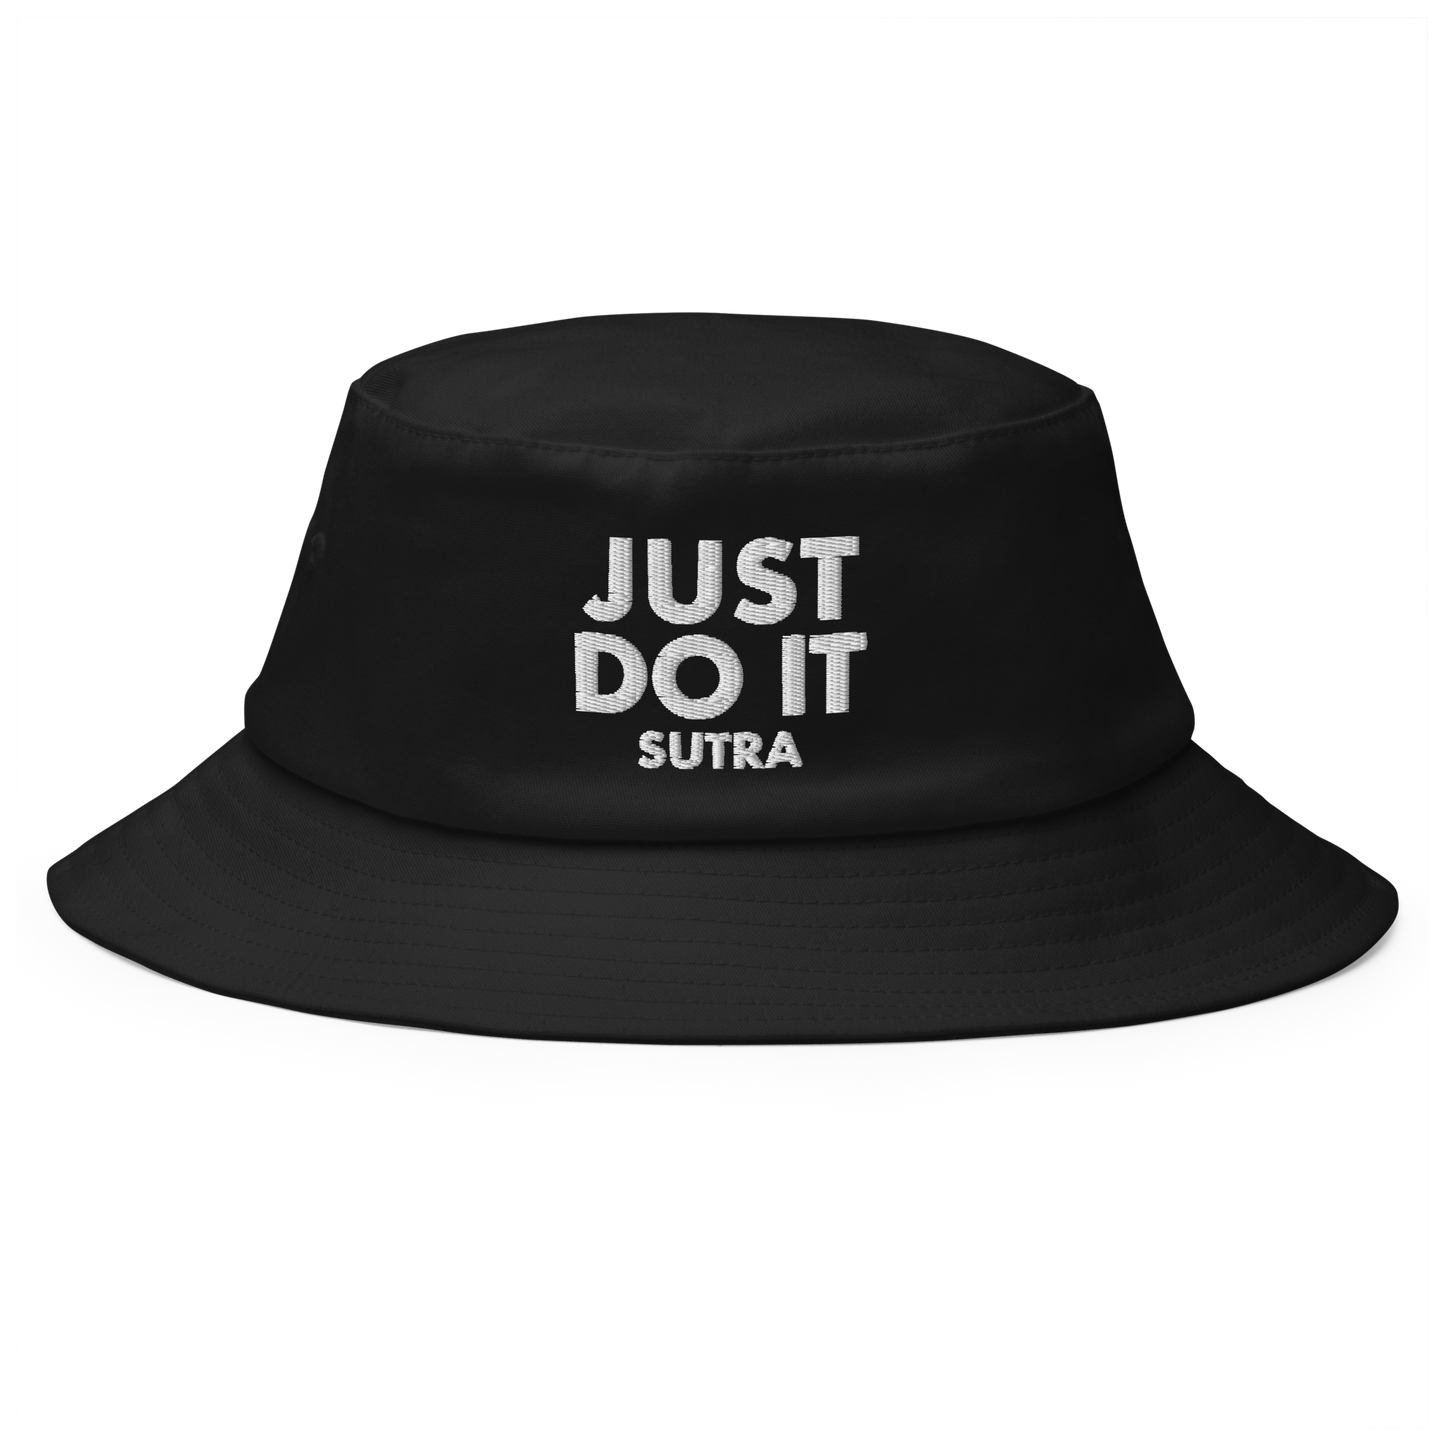 “Just do it sutra” - Bucket Hat